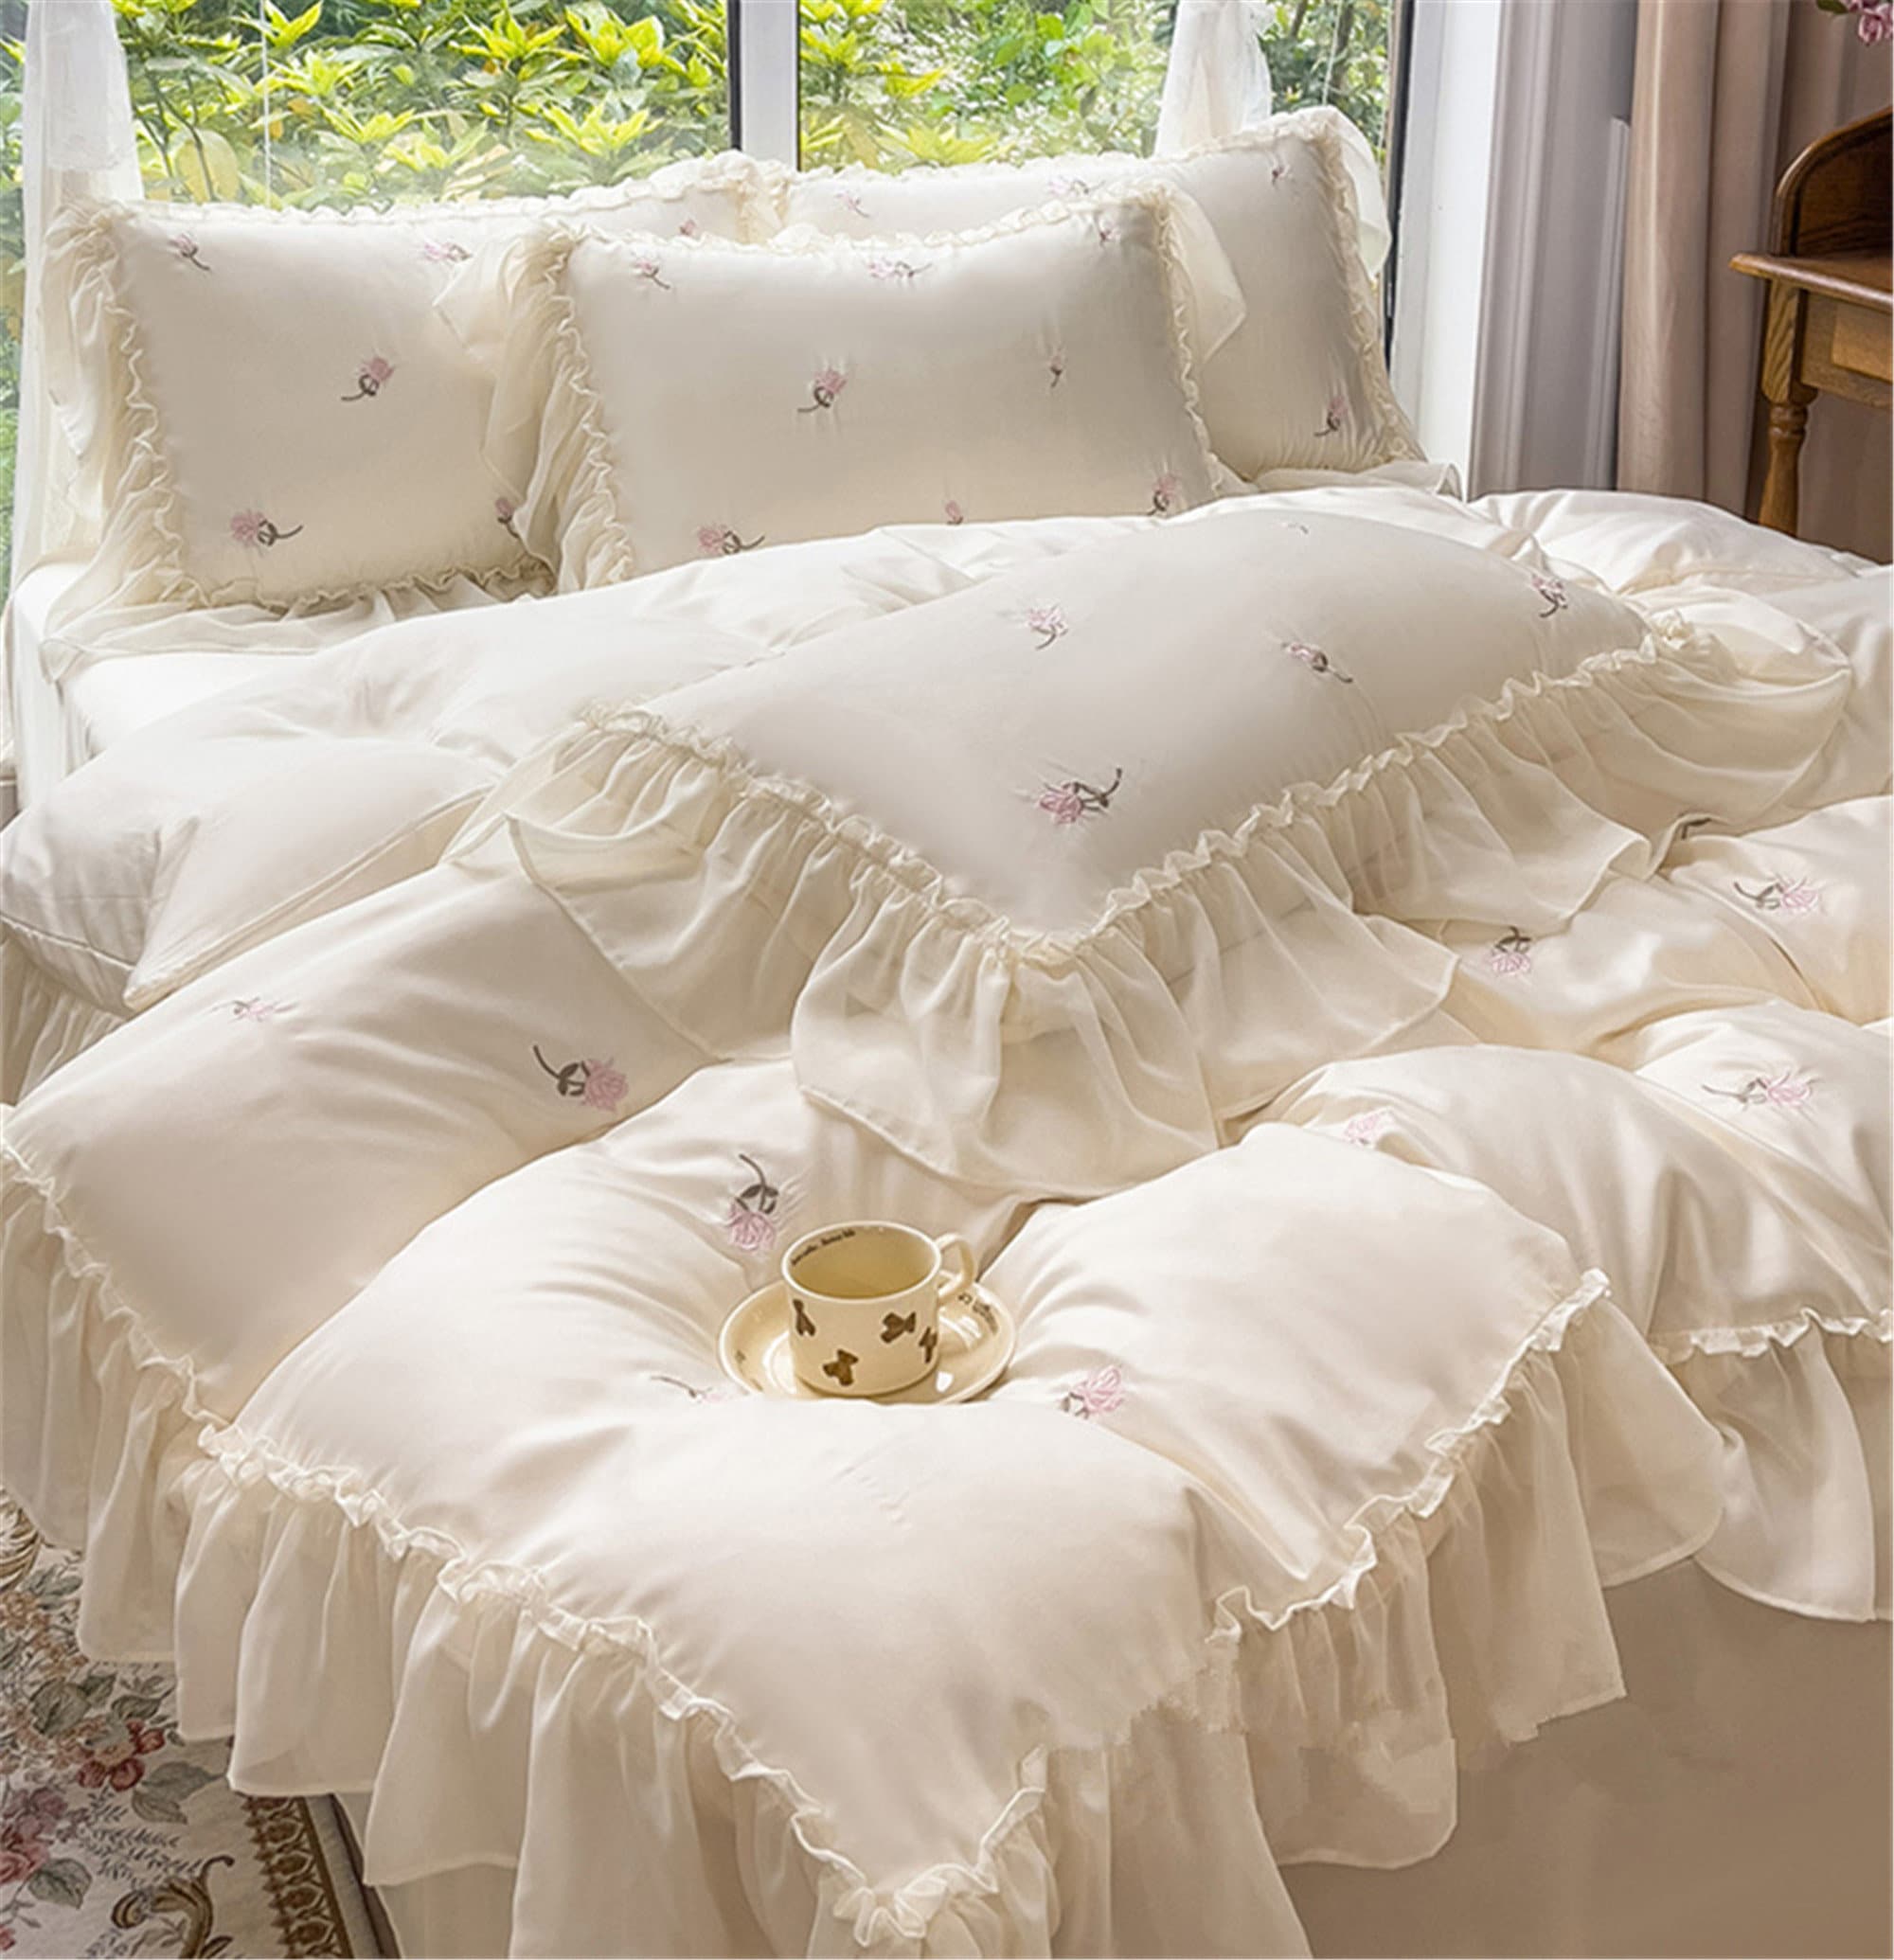 Candy Lace Gingham Ruffle Bedding Set / Pink  Ruffle bedding sets, Ruffle  bedding, Bedding set